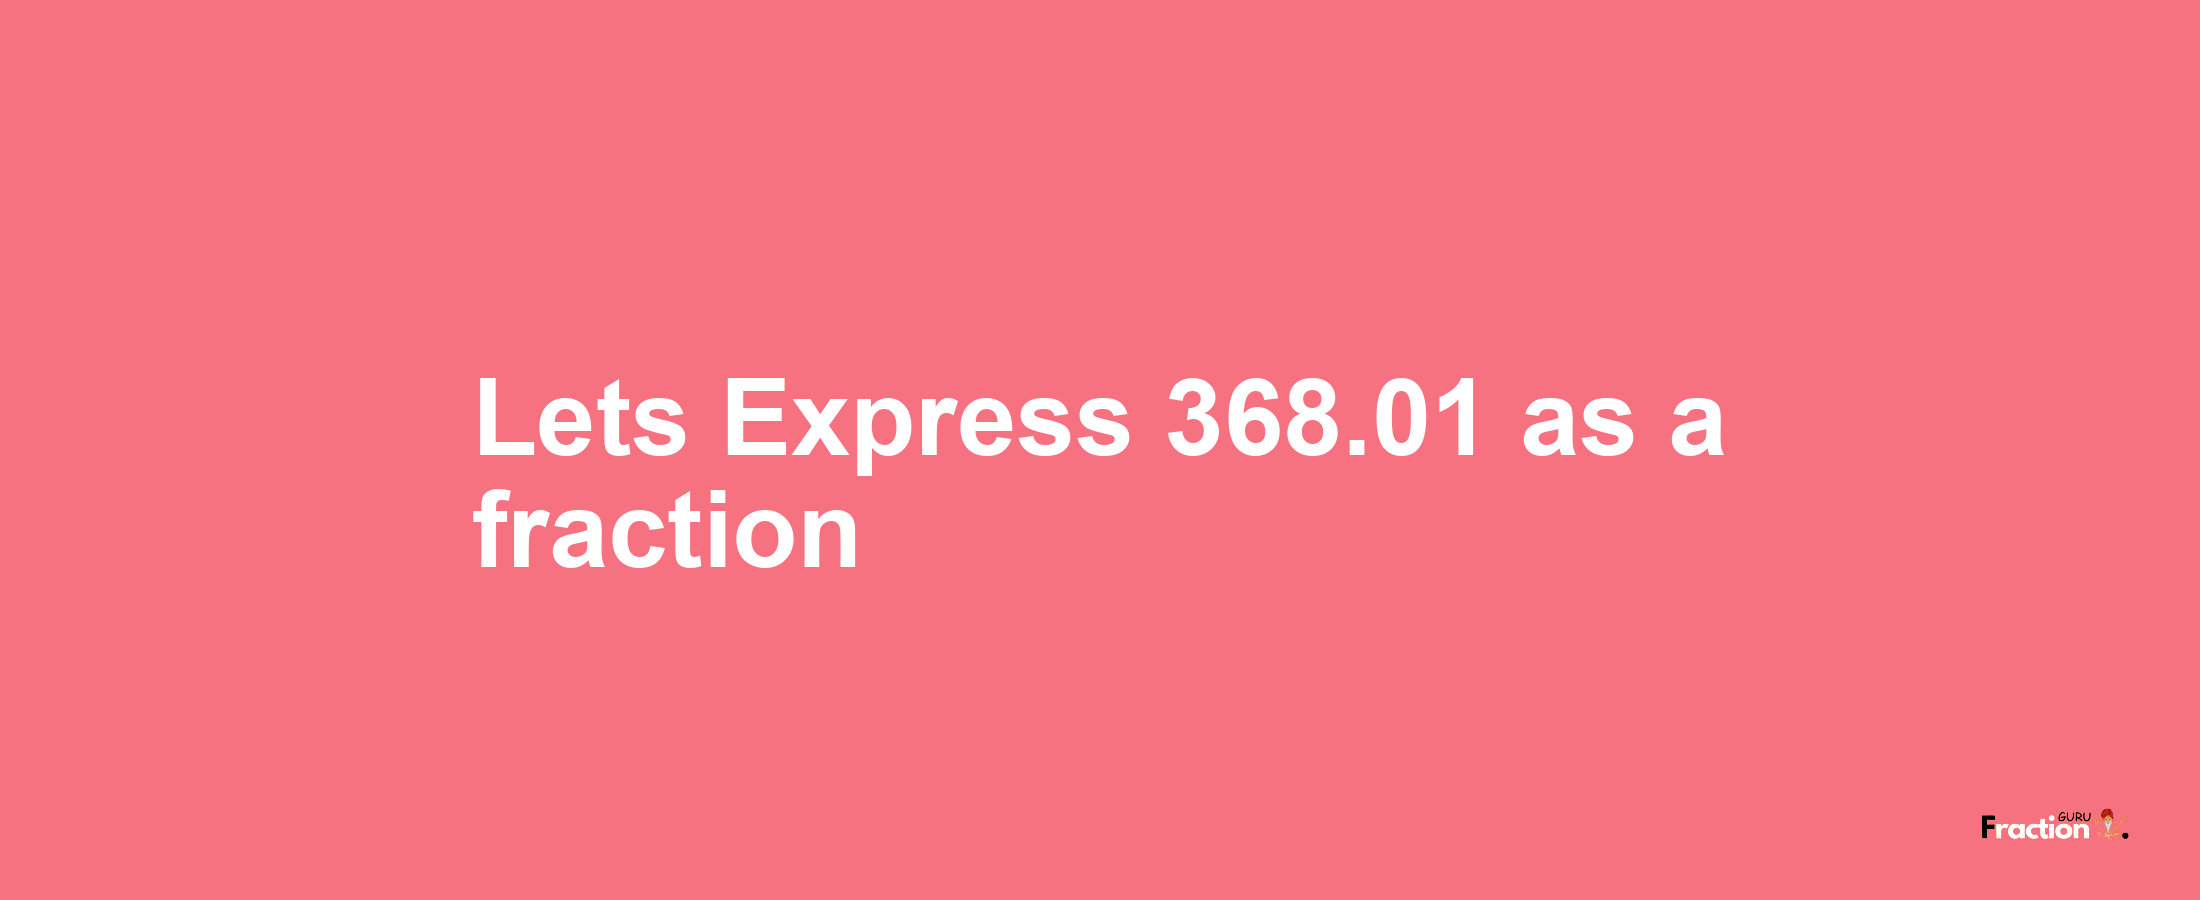 Lets Express 368.01 as afraction